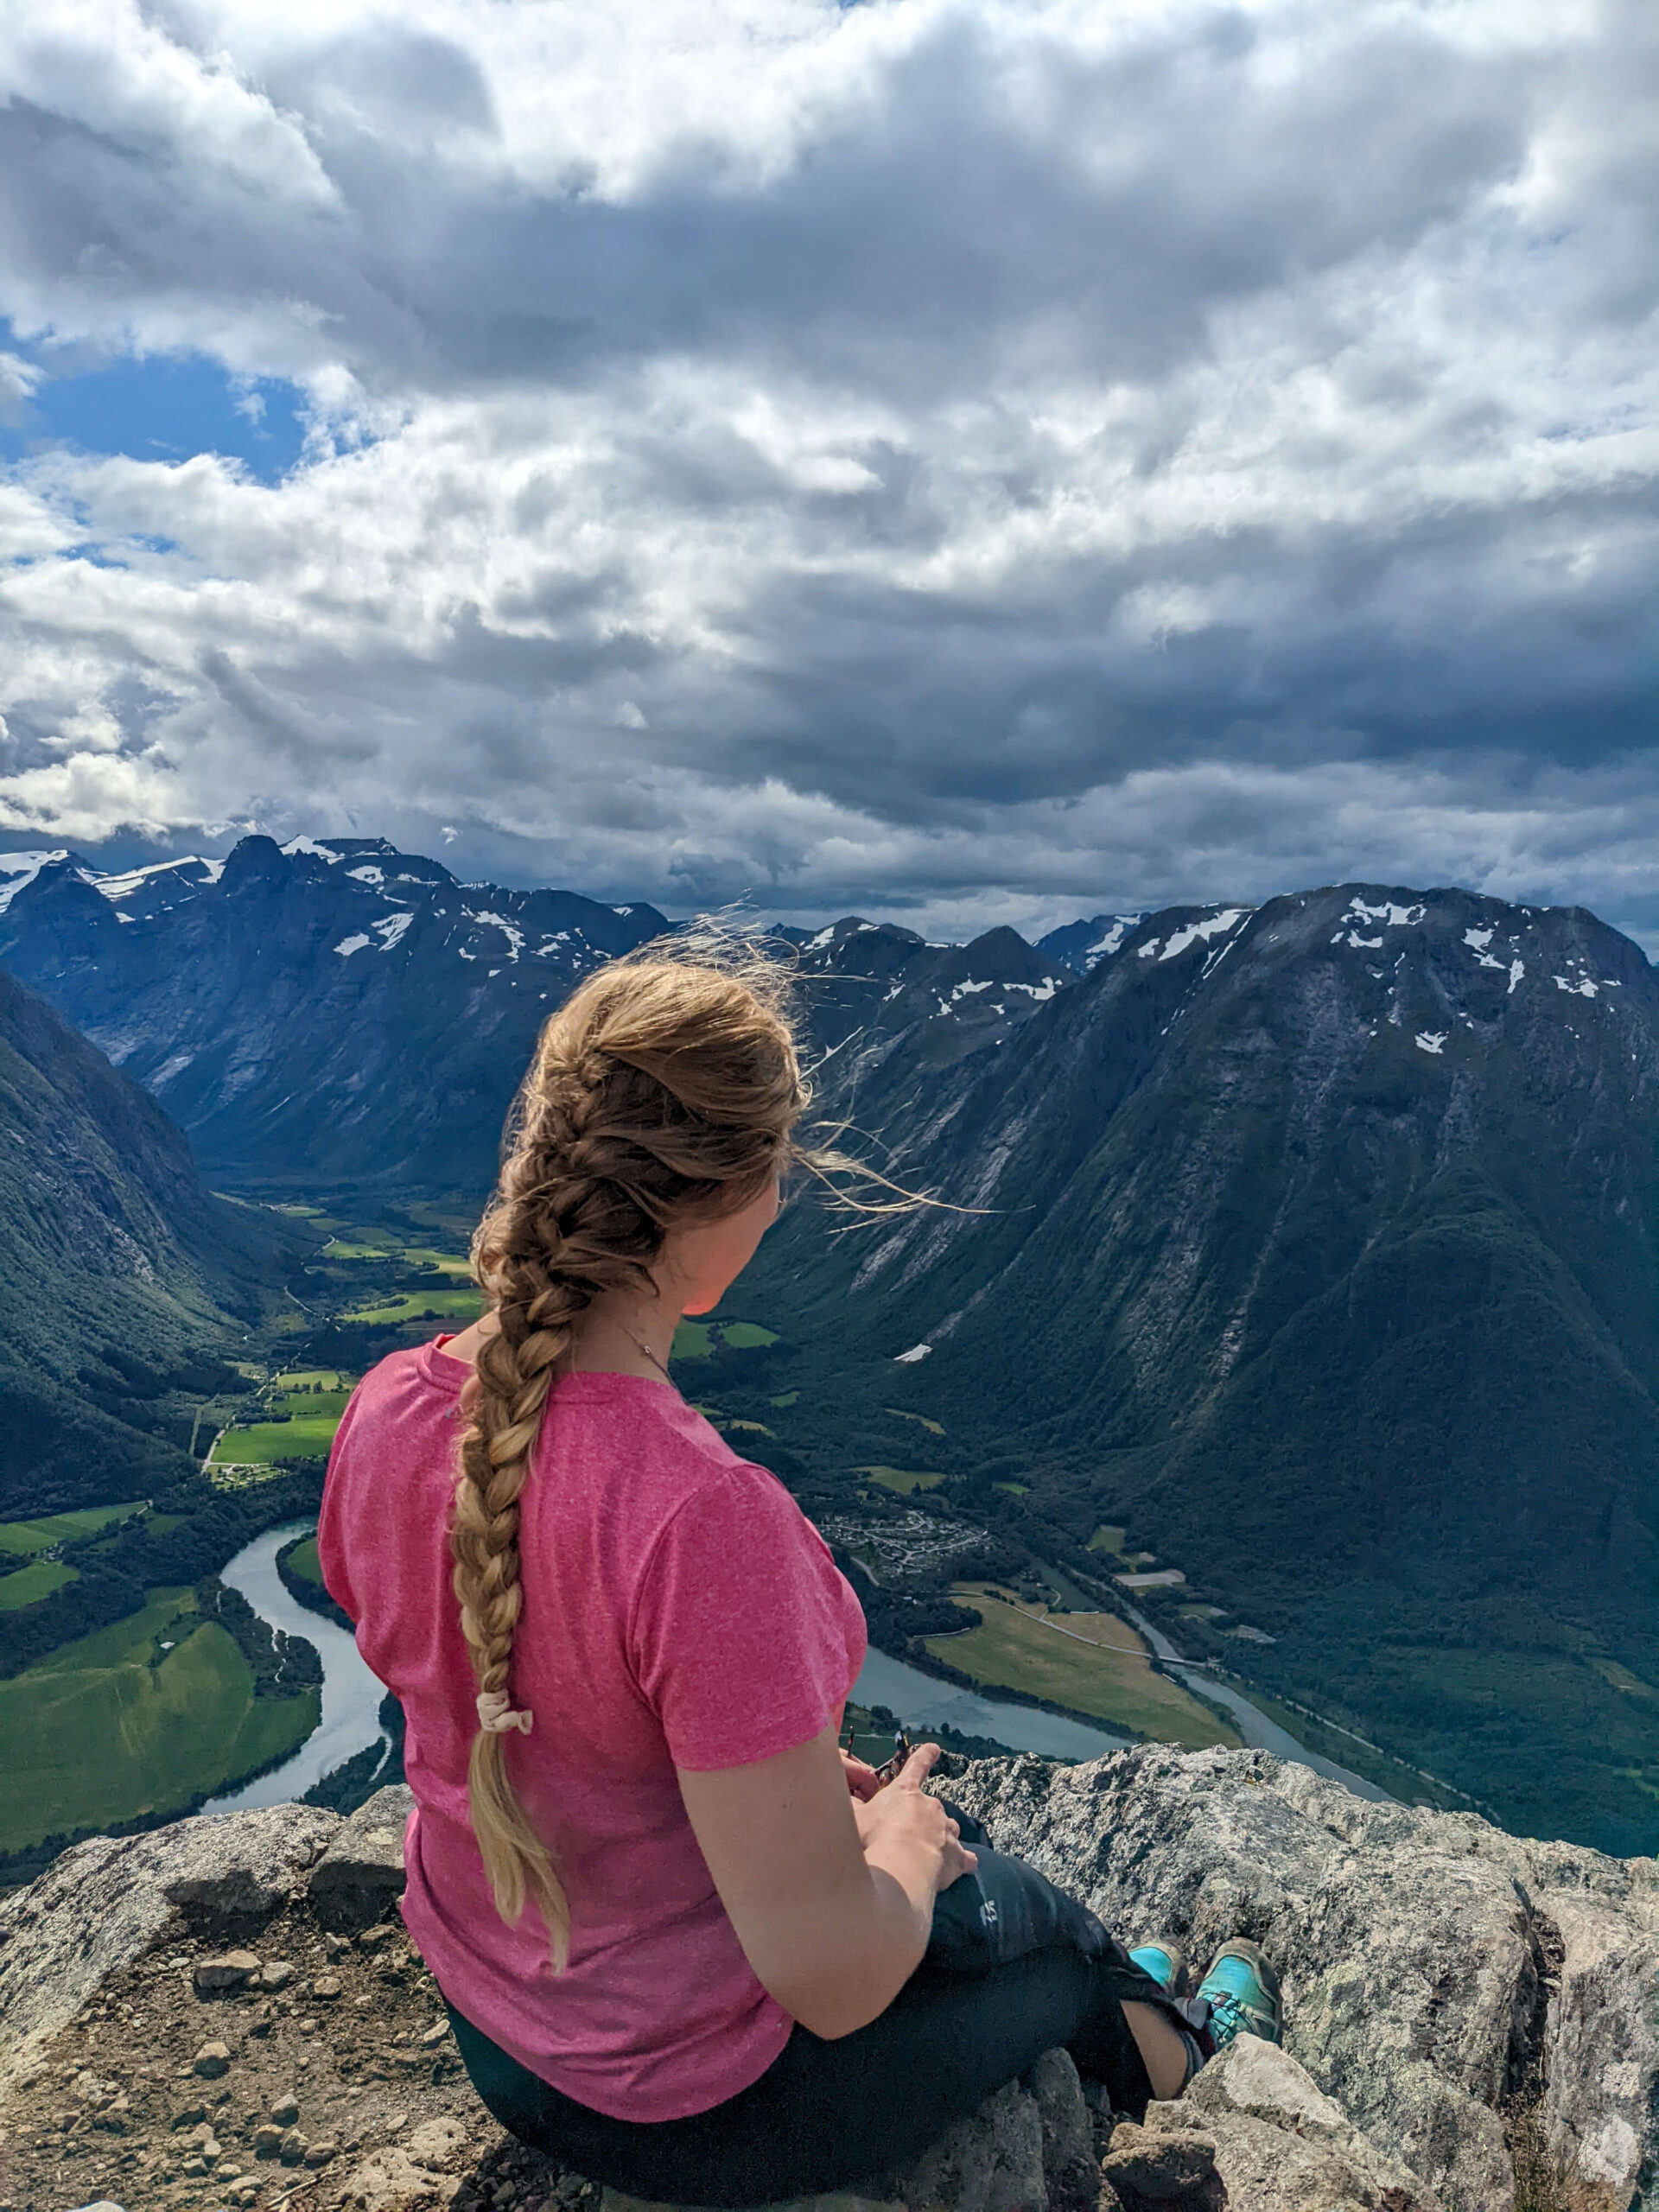 View from Nesaksla Mountain Andalsnes Norway in August